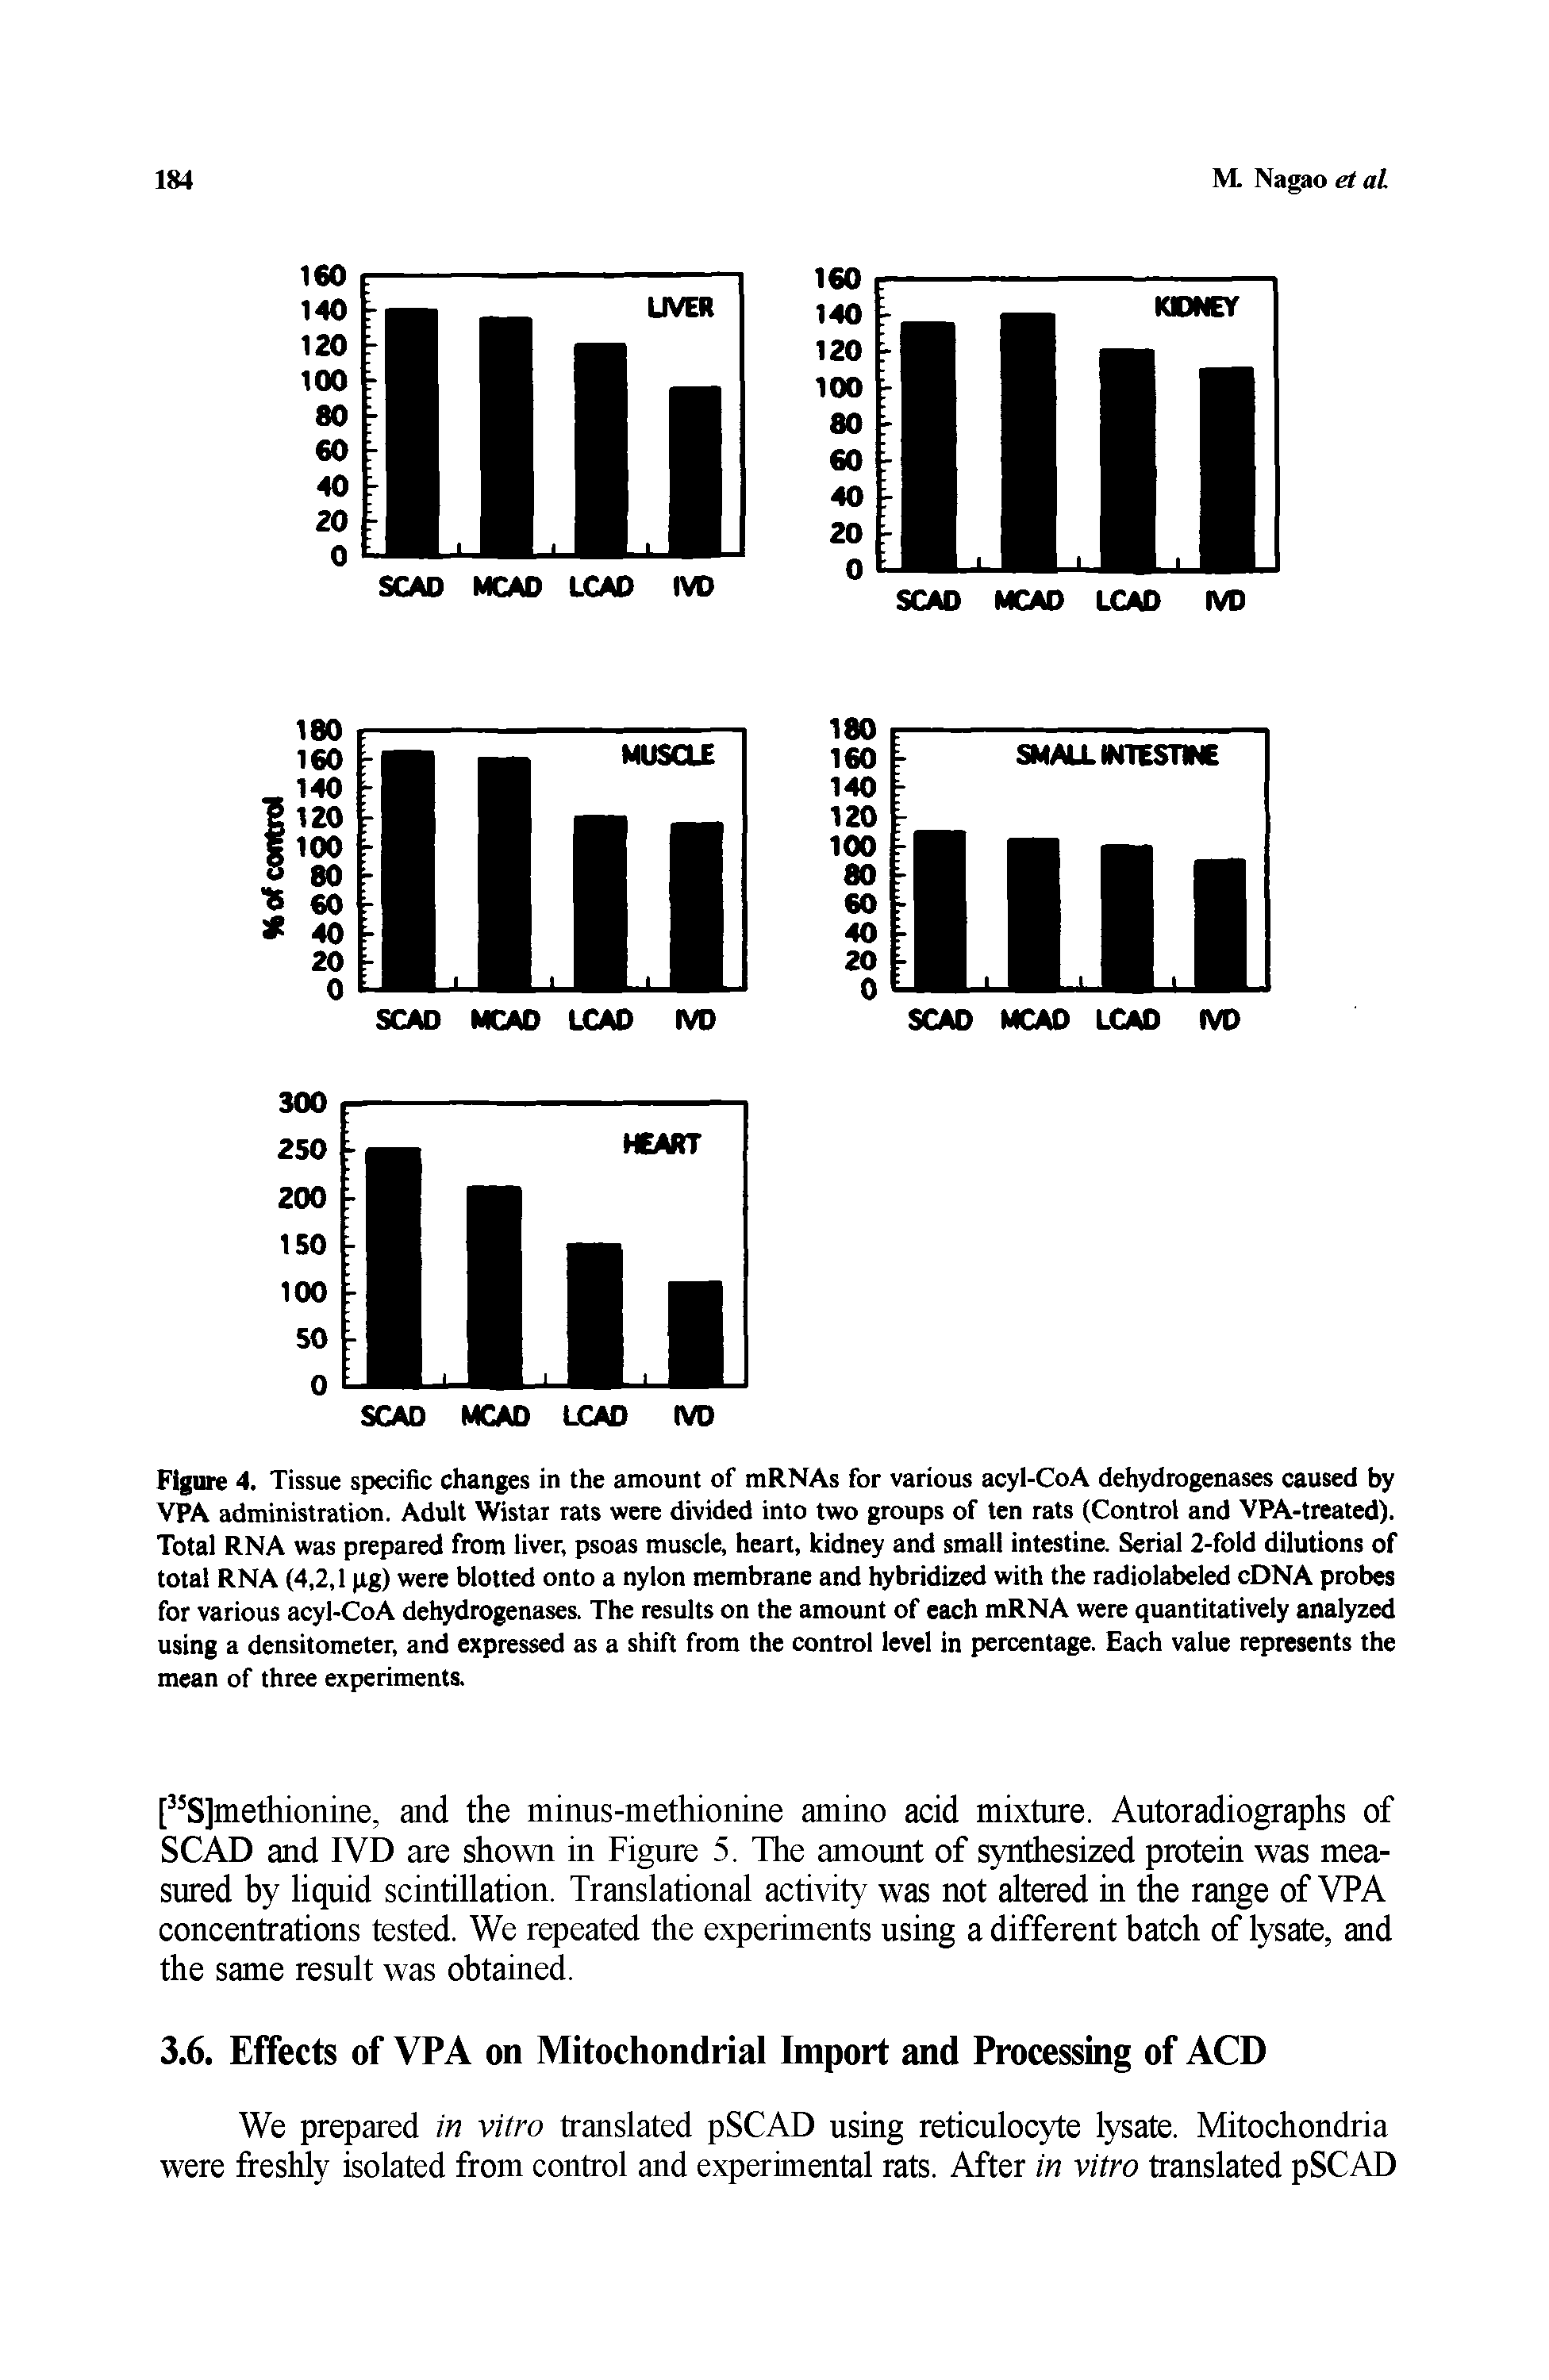 Figure 4. Tissue specific changes in the amount of mRNAs for various acyl-CoA dehydrogenases caused by VPA administration. Adult Wistai rats were divided into two groups of ten rats (Control and VPA-treated). Total RNA was prepared from liver, psoas muscle, heart, kidney and small intestine. Serial 2-fold dilutions of total RNA (4,2,1 ng) were blotted onto a nylon membrane and hybridized with the radiolabeled cDNA probes for various acyl-CoA dehydrogenases. The results on the amount of each mRNA were quantitatively analyzed using a densitometer, and expressed as a shift from the control level in percentage. Each value represents the mean of three experiments.